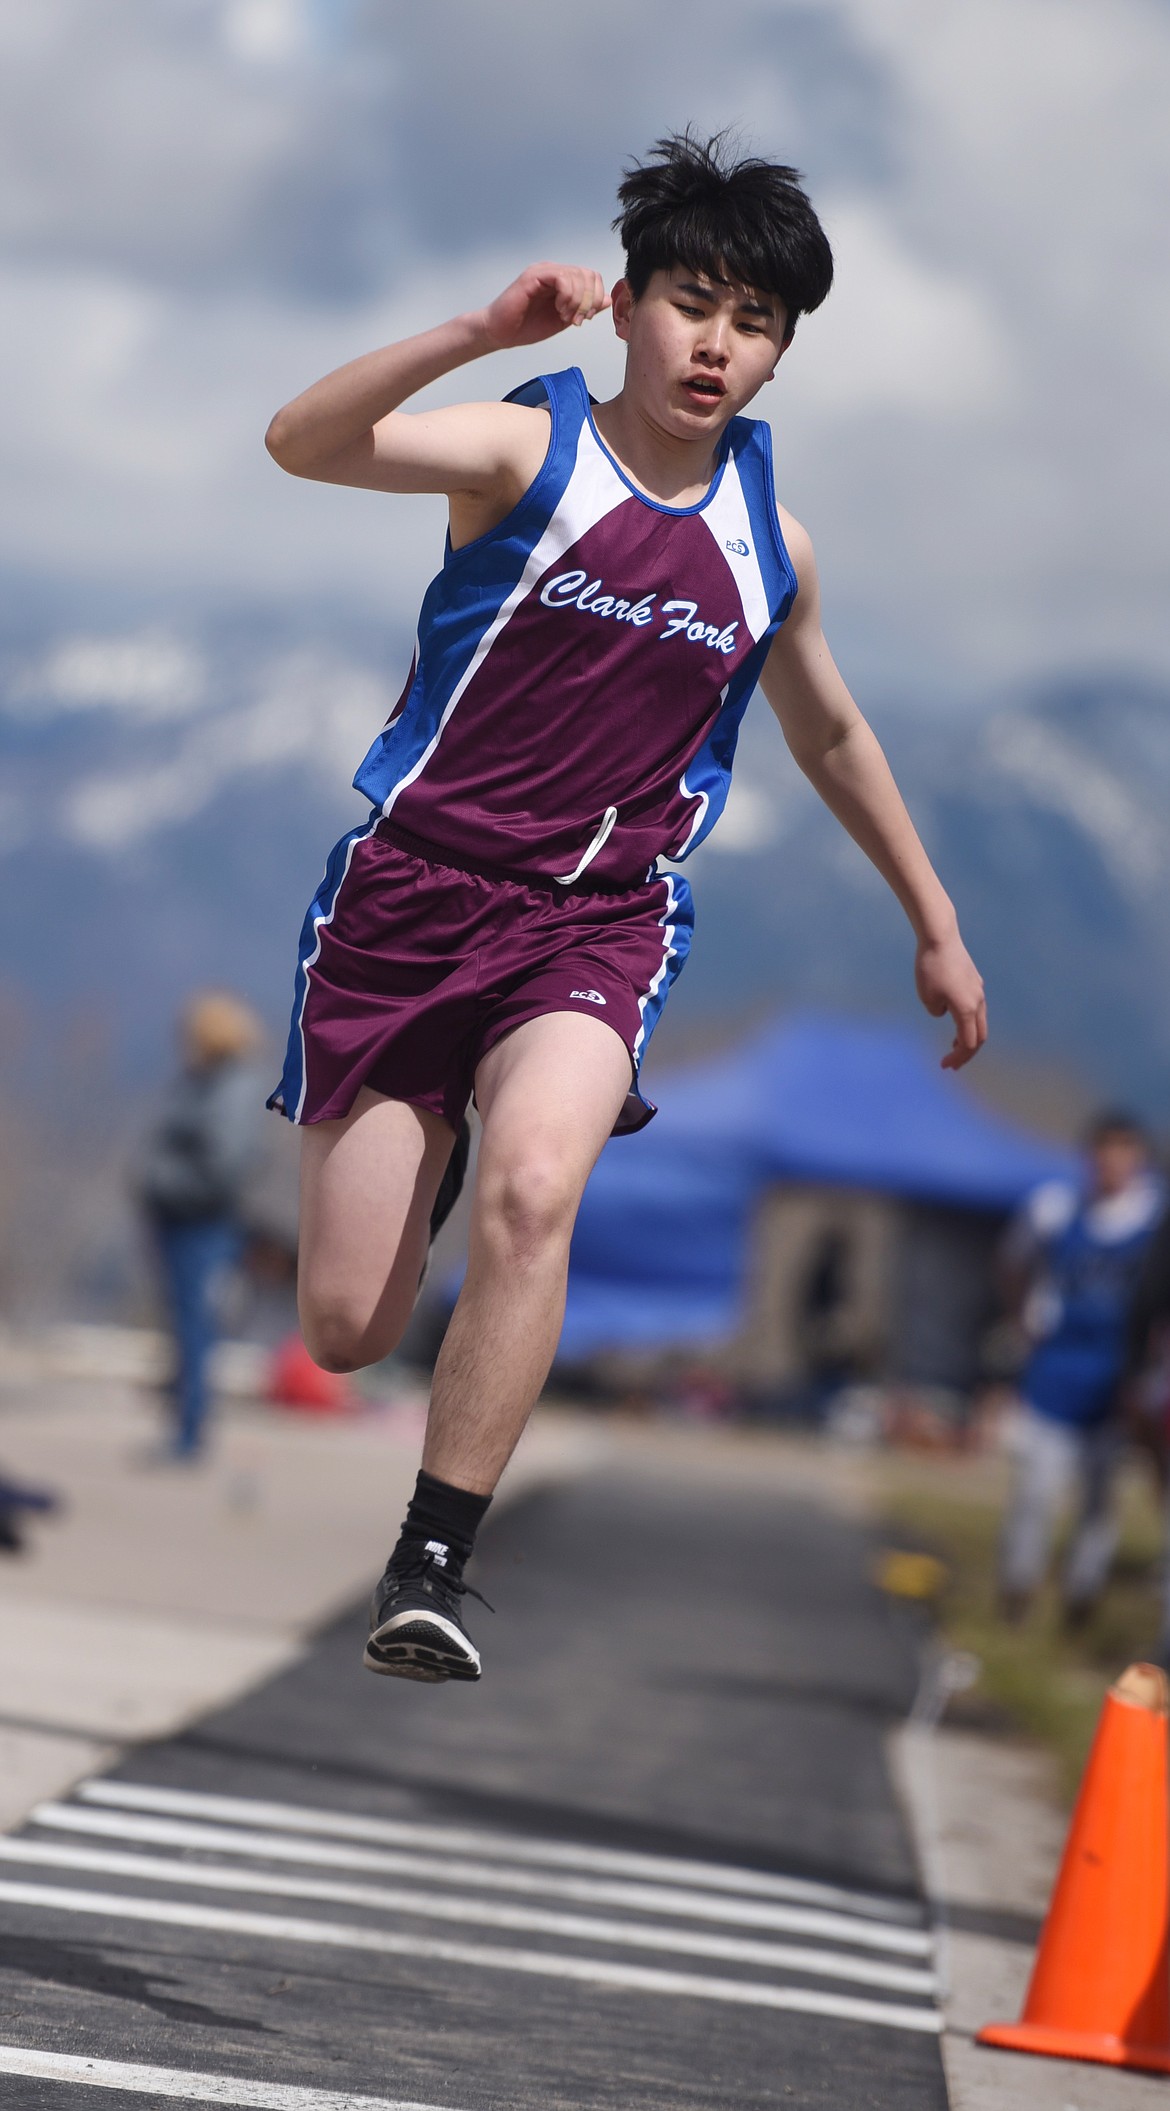 GIHWAN JUNG, an exchange student at Alberton High School, had a personal best of 30 feet, 9 1/2 inches in the triple jump for Clark Fork at the Dave Tripp Invitational last Friday in Polson.